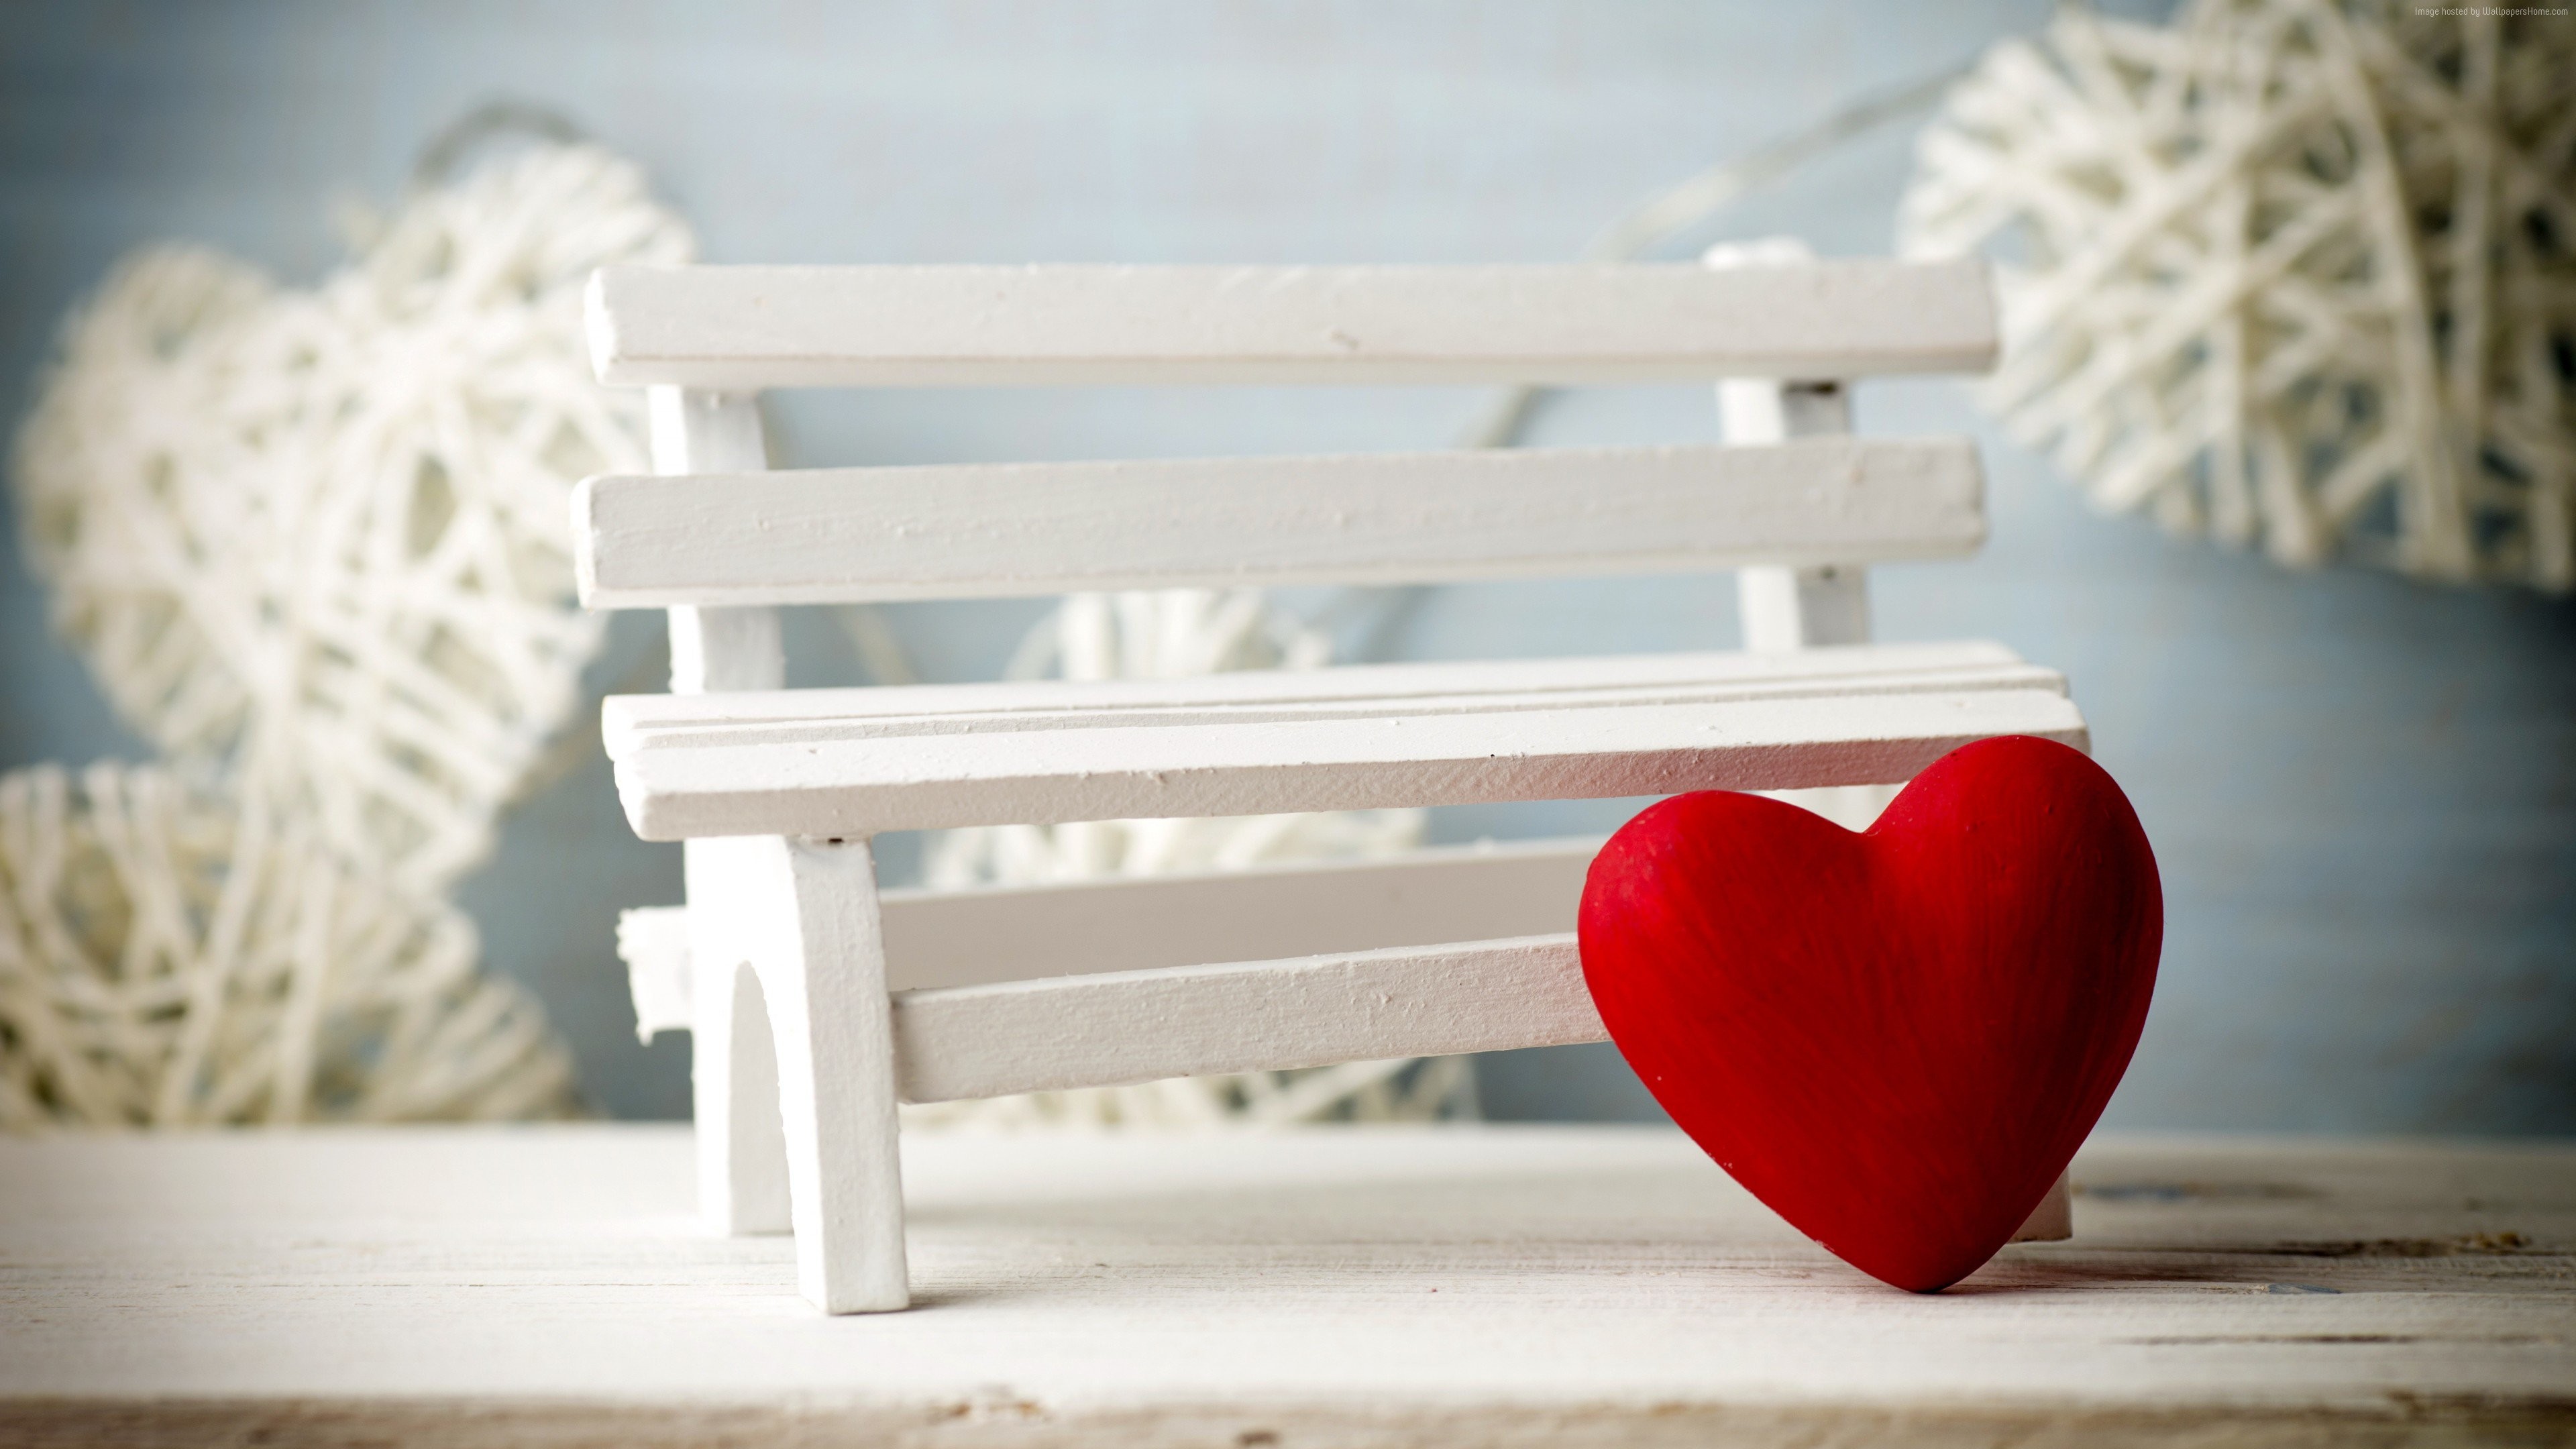 3840x2160 Red heart in front of the white bench